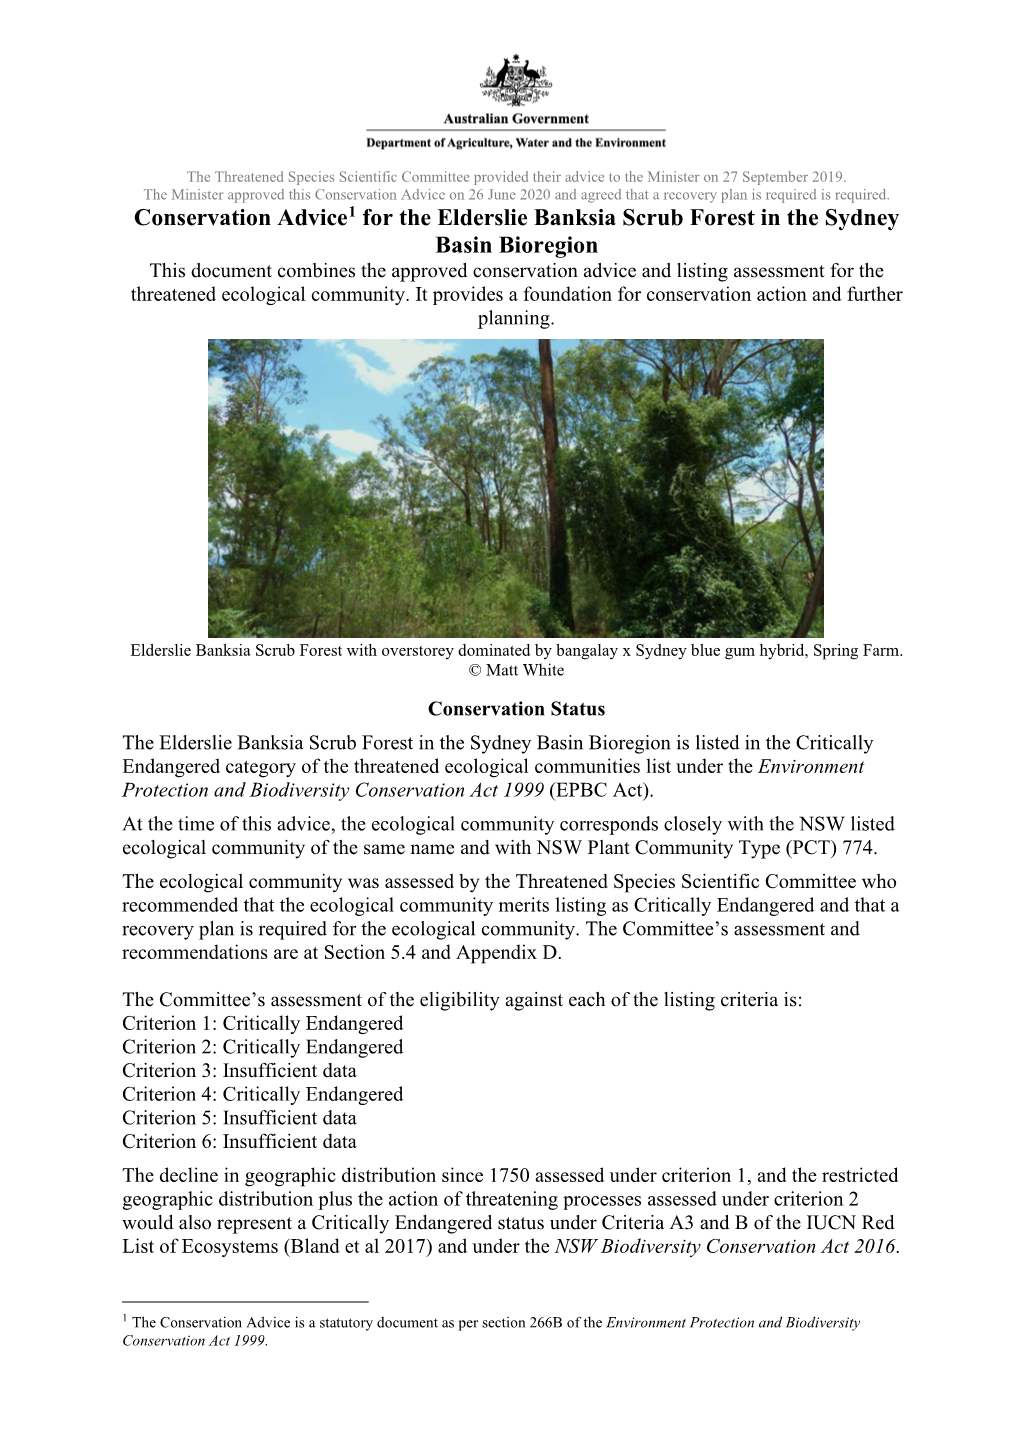 Conservation Advice for the Elderslie Banksia Scrub Forest in the Sydney